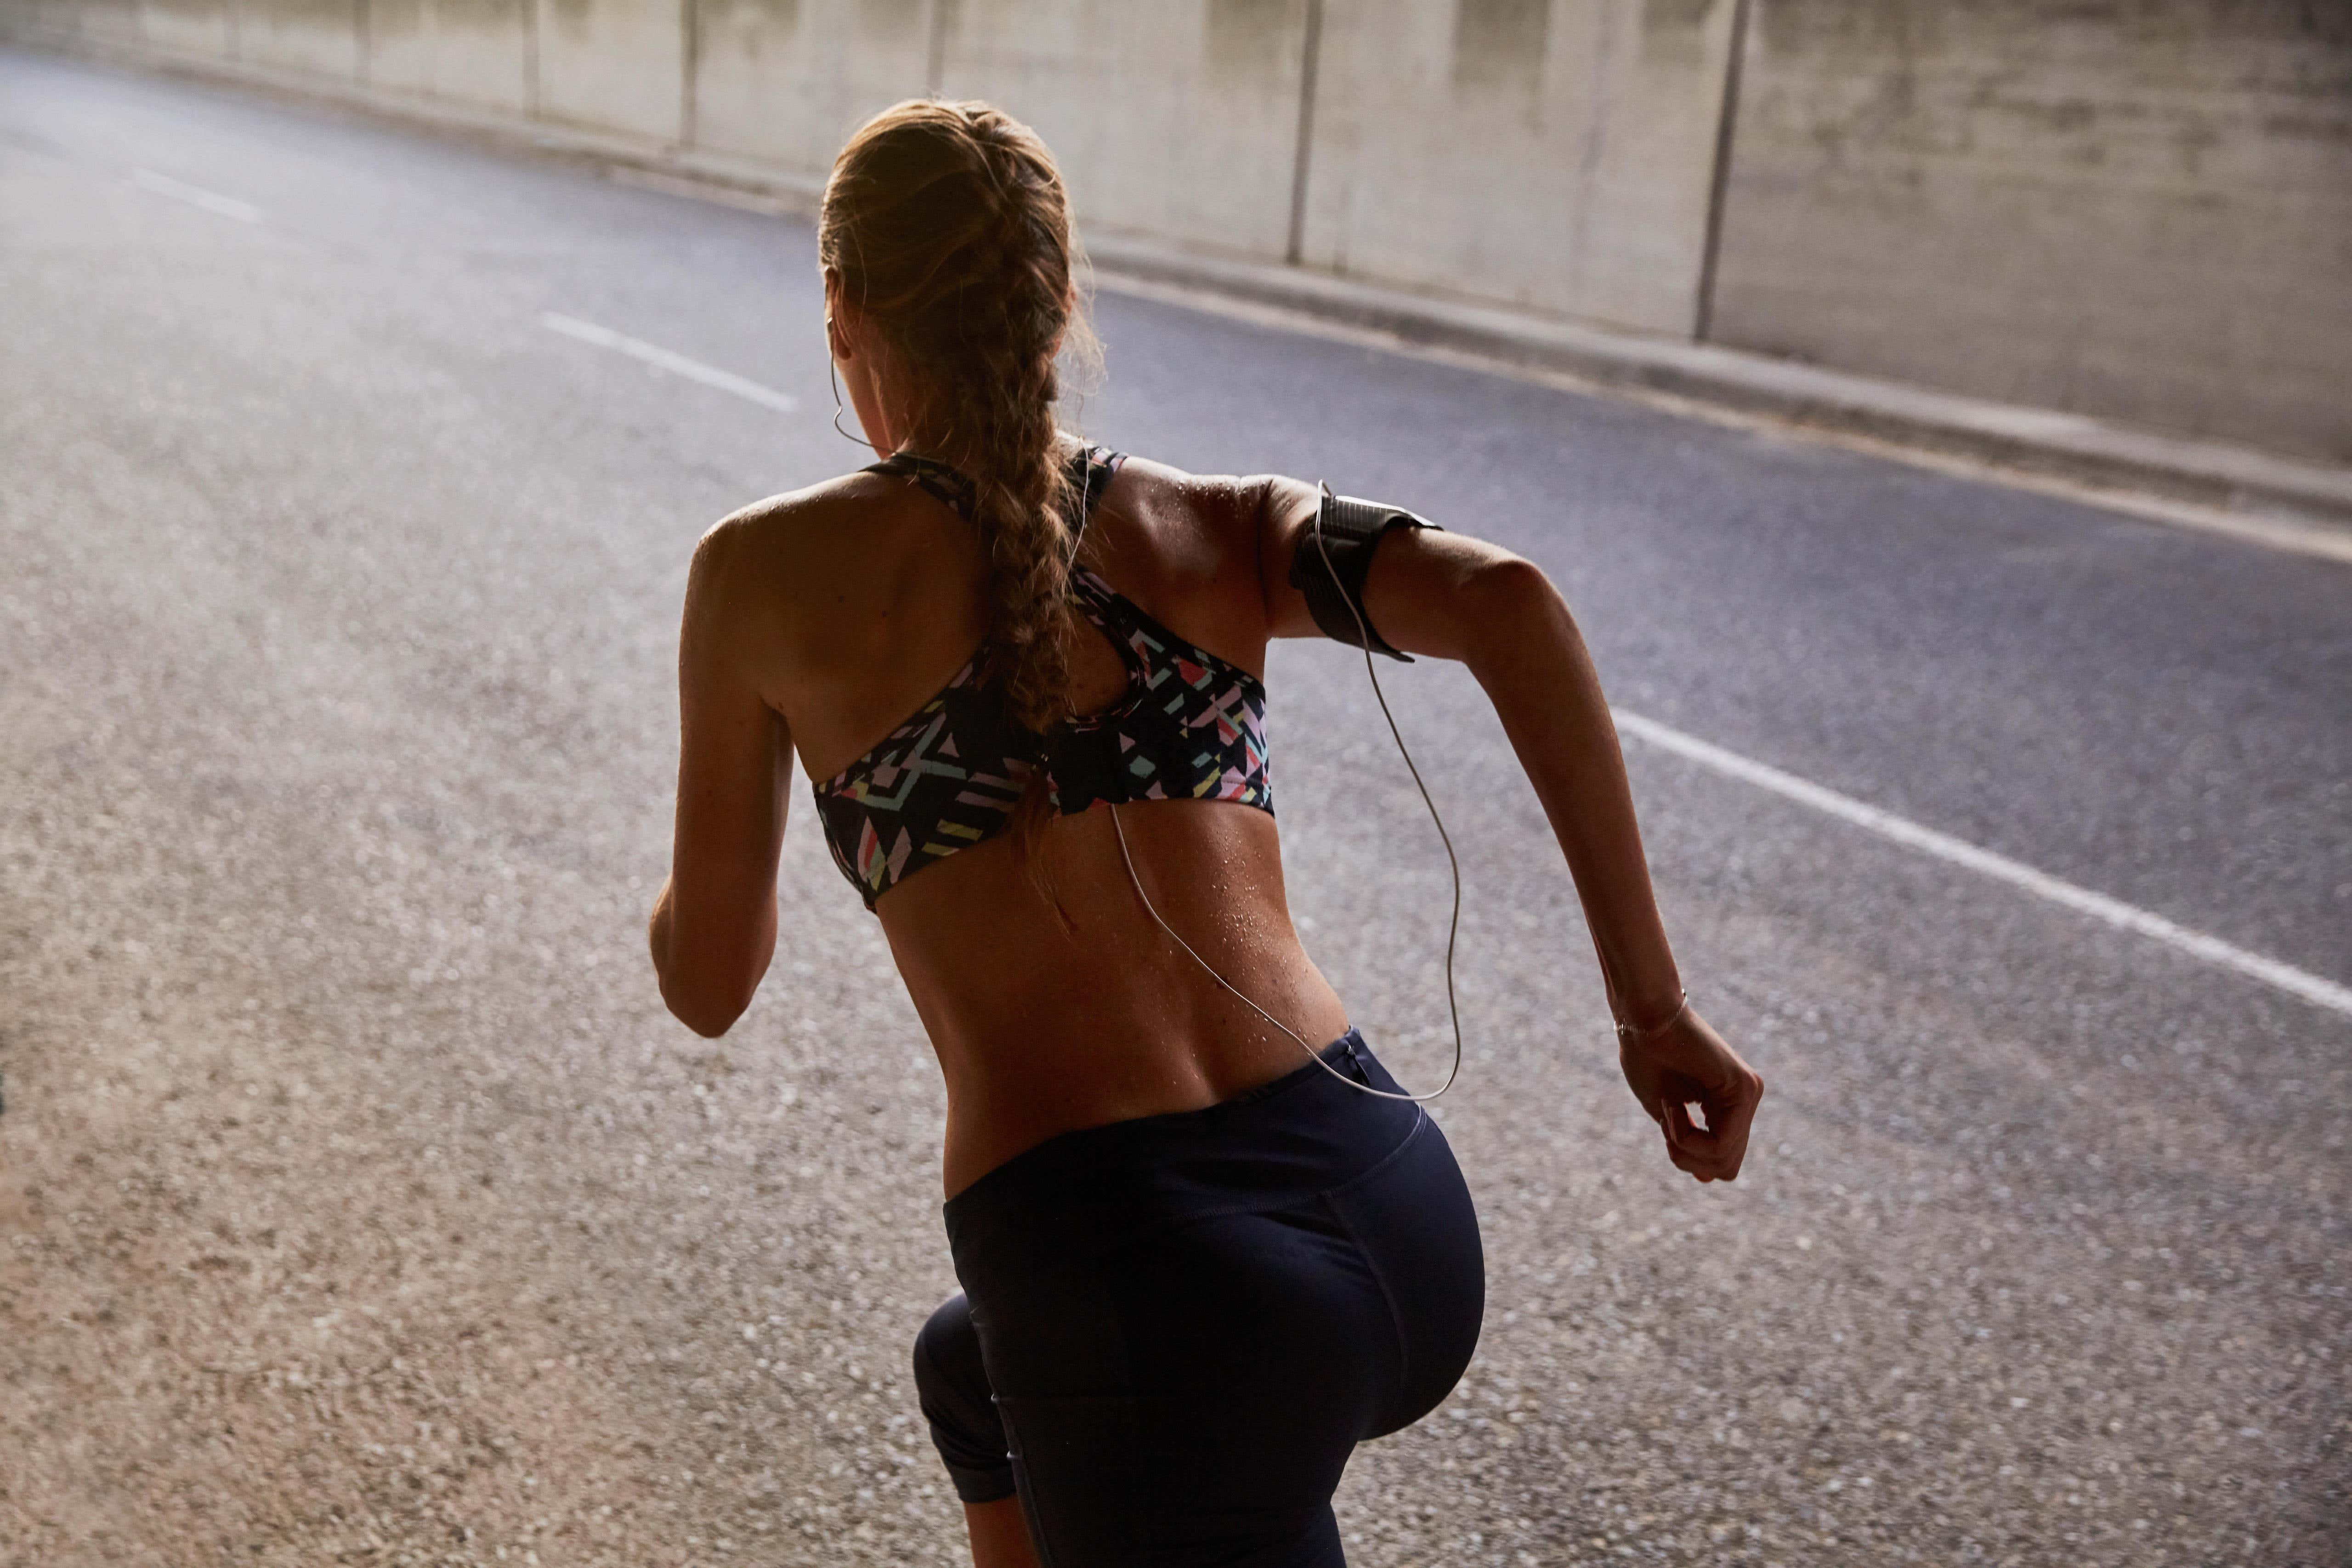 Could wearing the right sports bra improve running performance